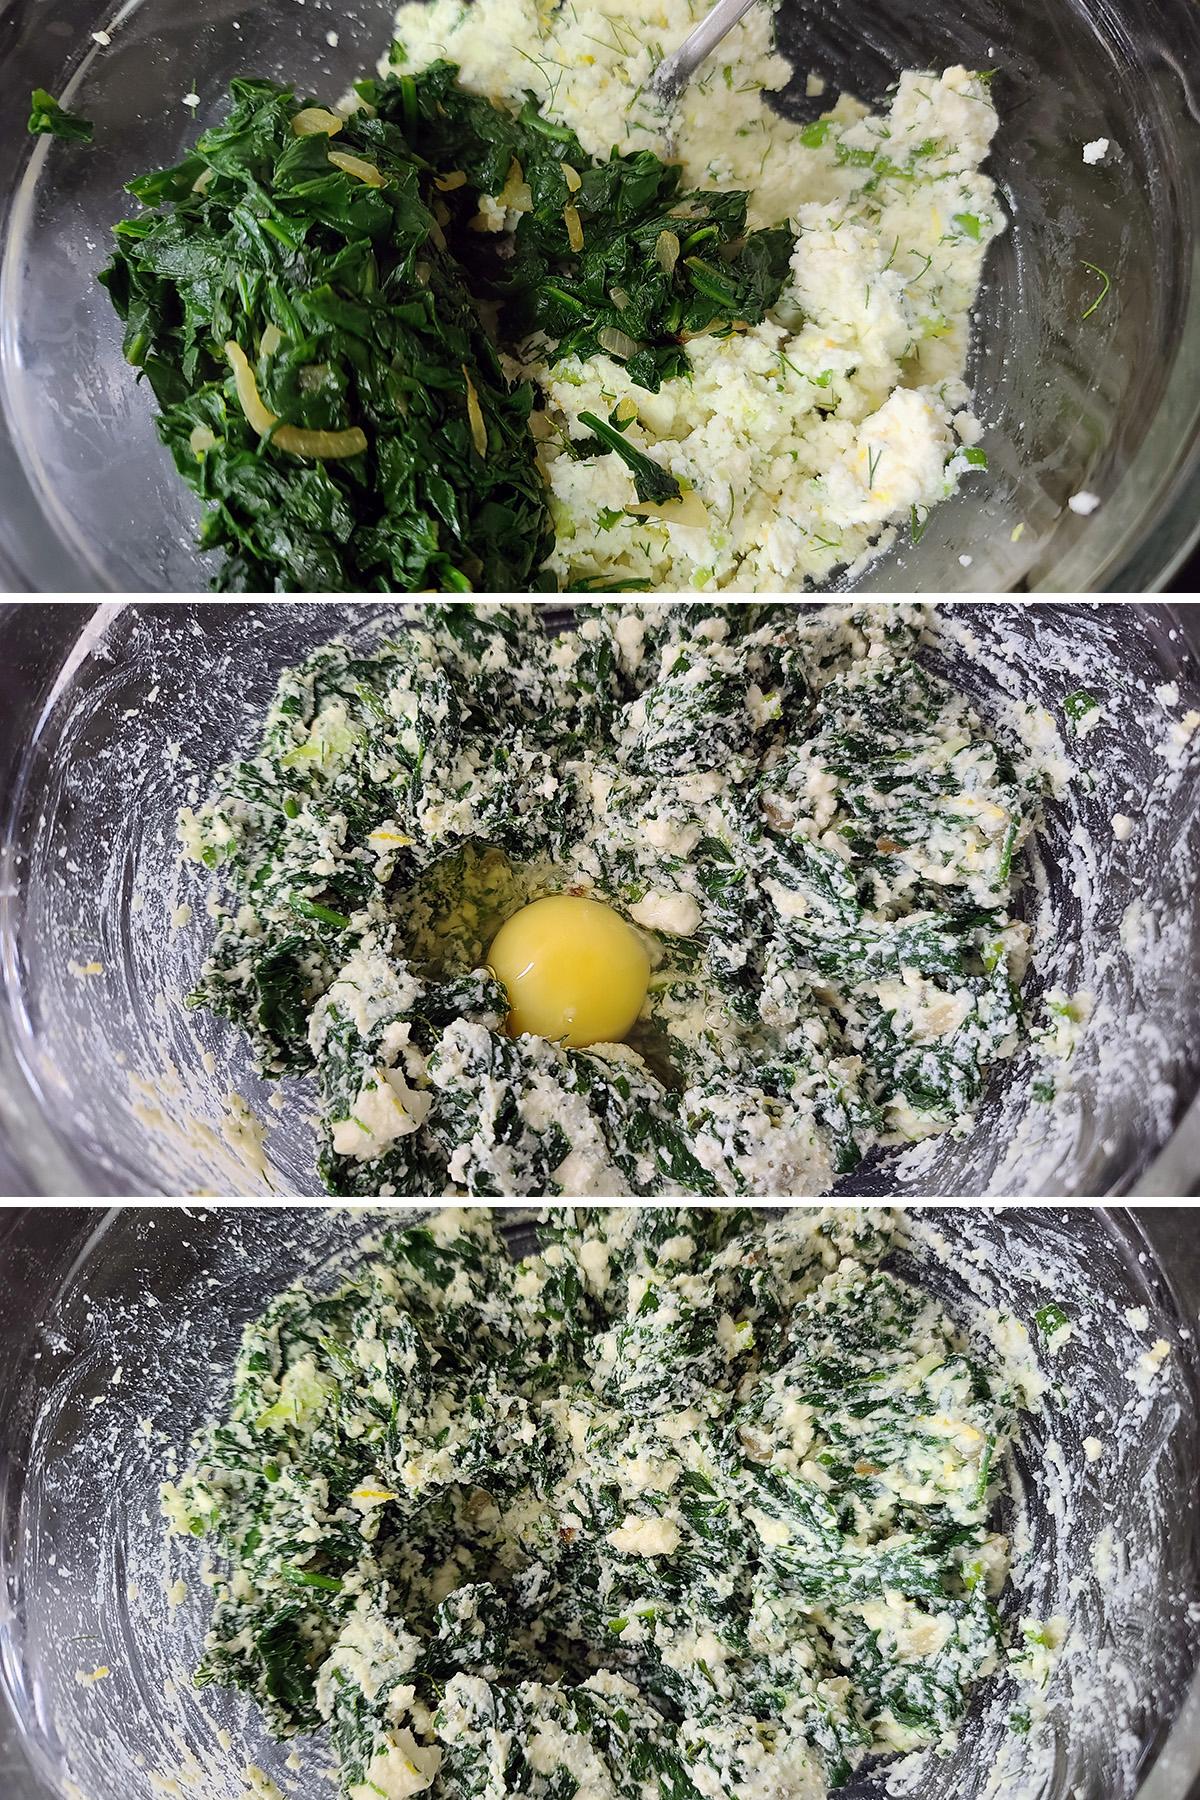 A 3 part image showing the spinach and egg being mixed in with the cheese and other filling ingredients.